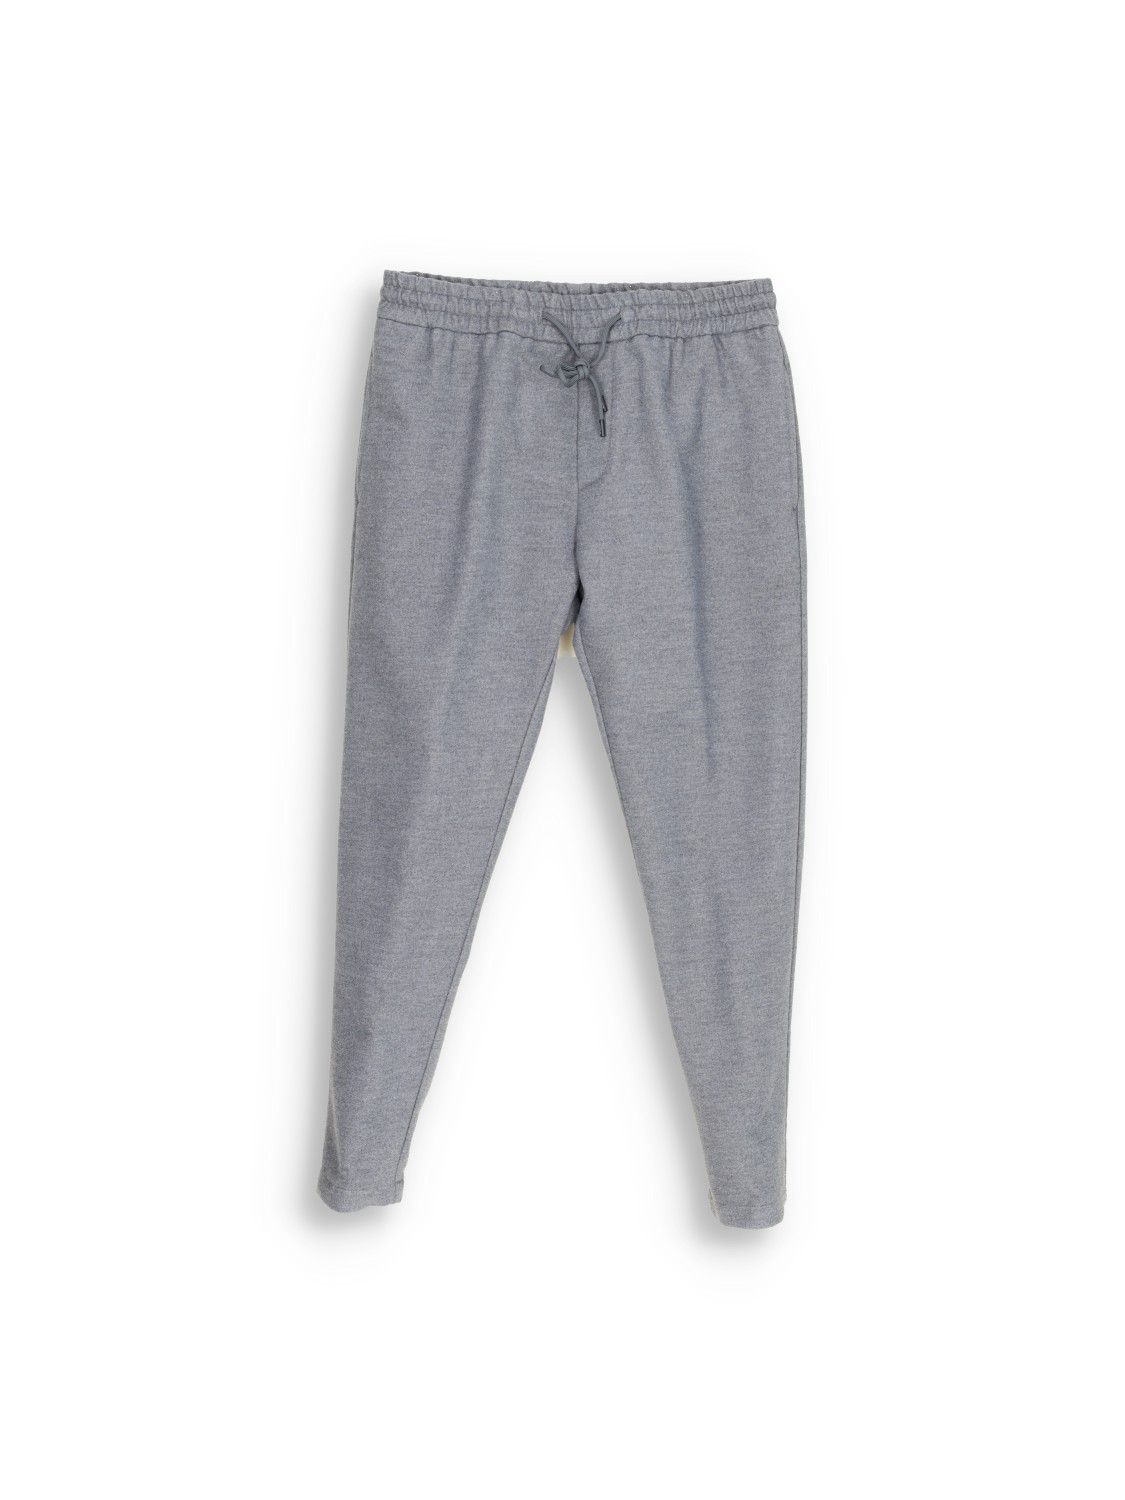 Pants with jogger waistband made of virgin wool 